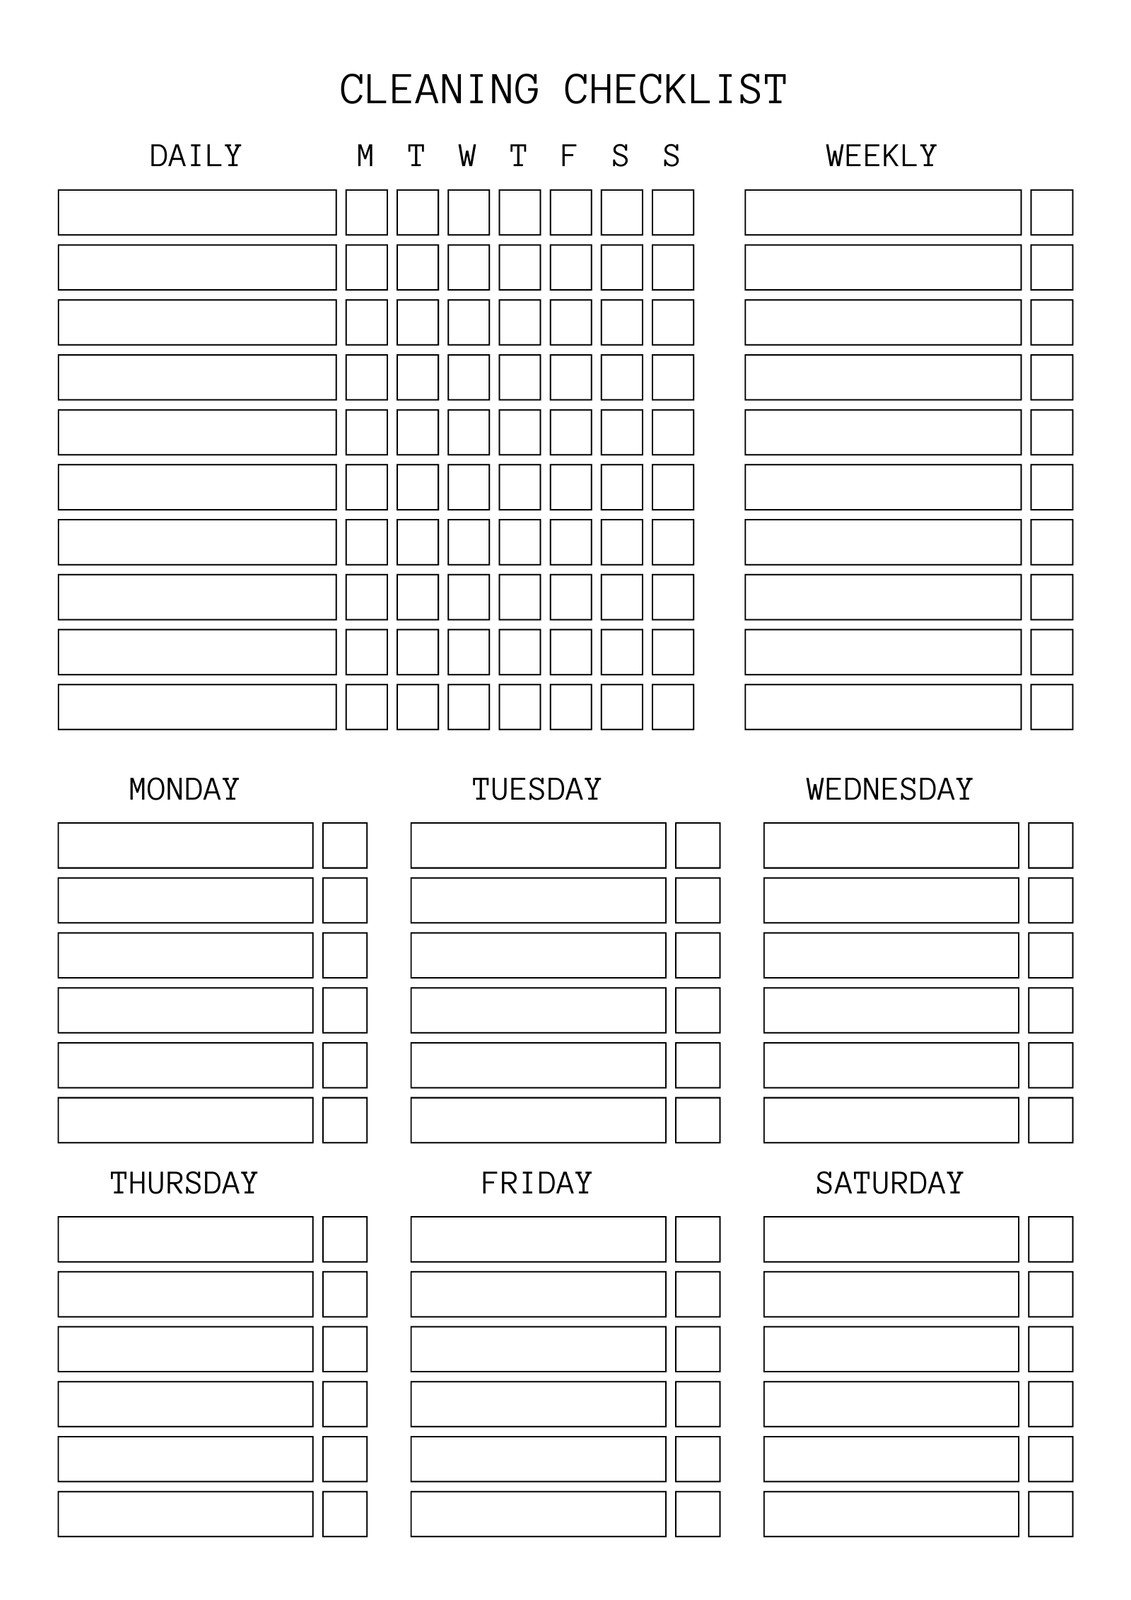 Free Printable Cleaning Checklist Templates | Canva regarding Free Printable Housework Checklist